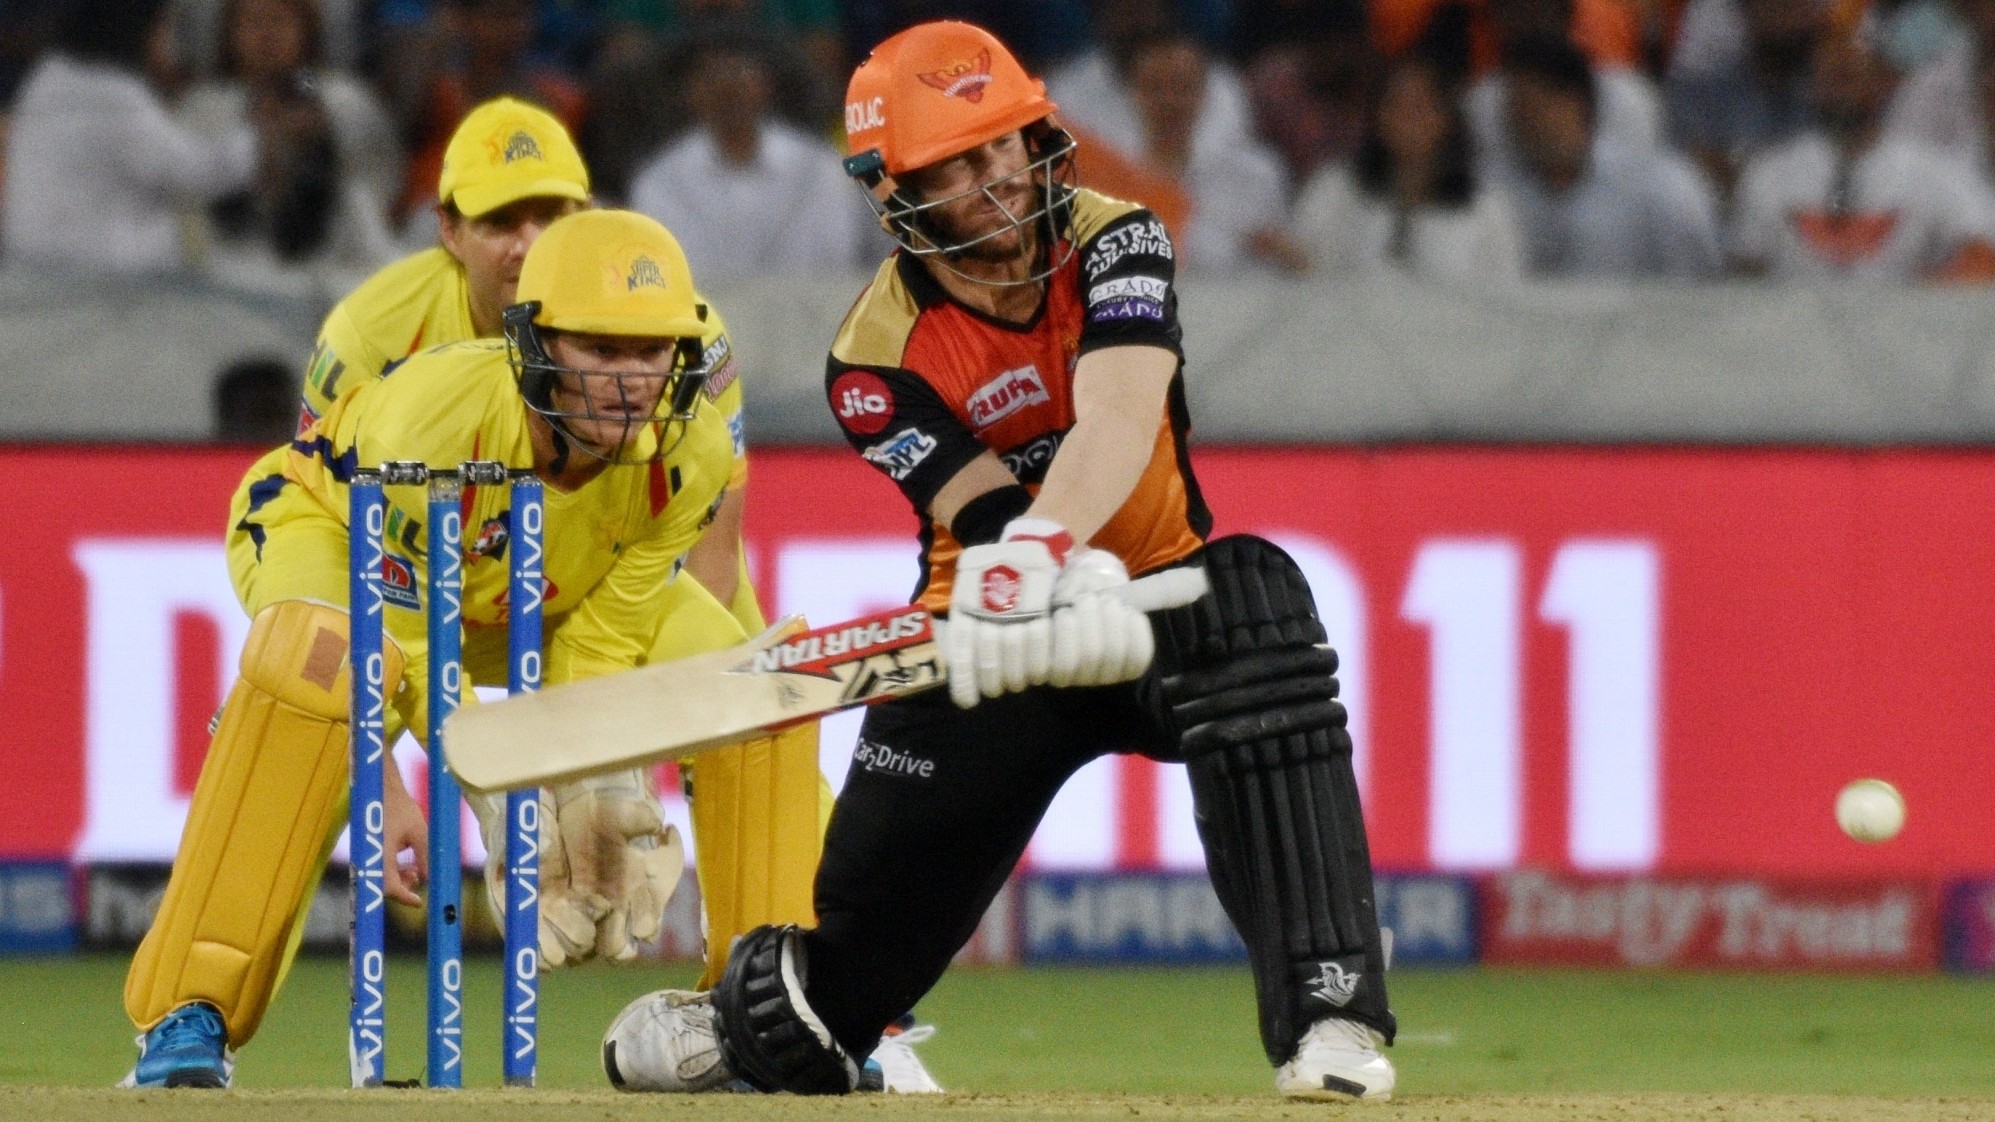 IPL 2020: Match 14, CSK v SRH - Statistical Preview of the Match 